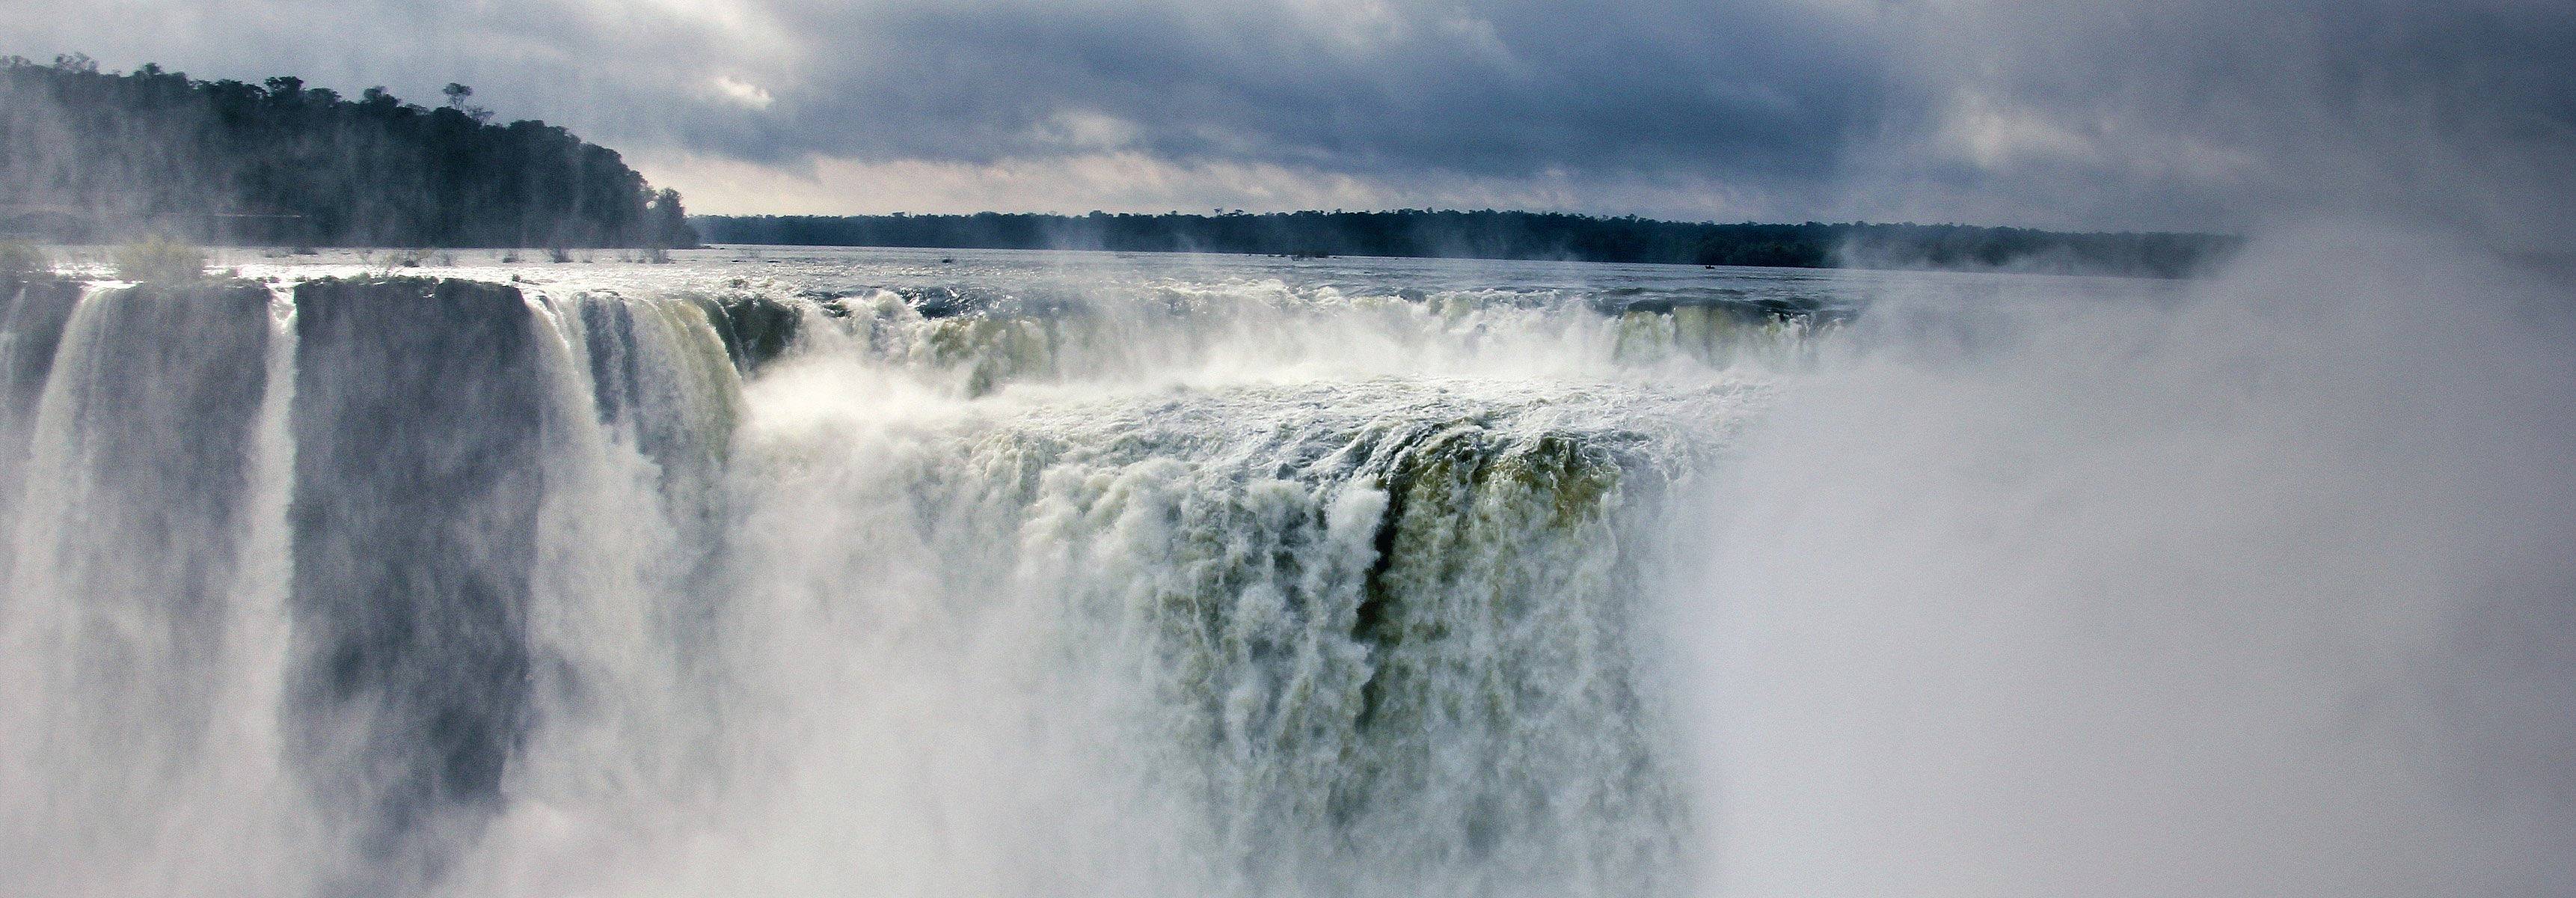 Iguassu Falls is the largest series of waterfalls on earth